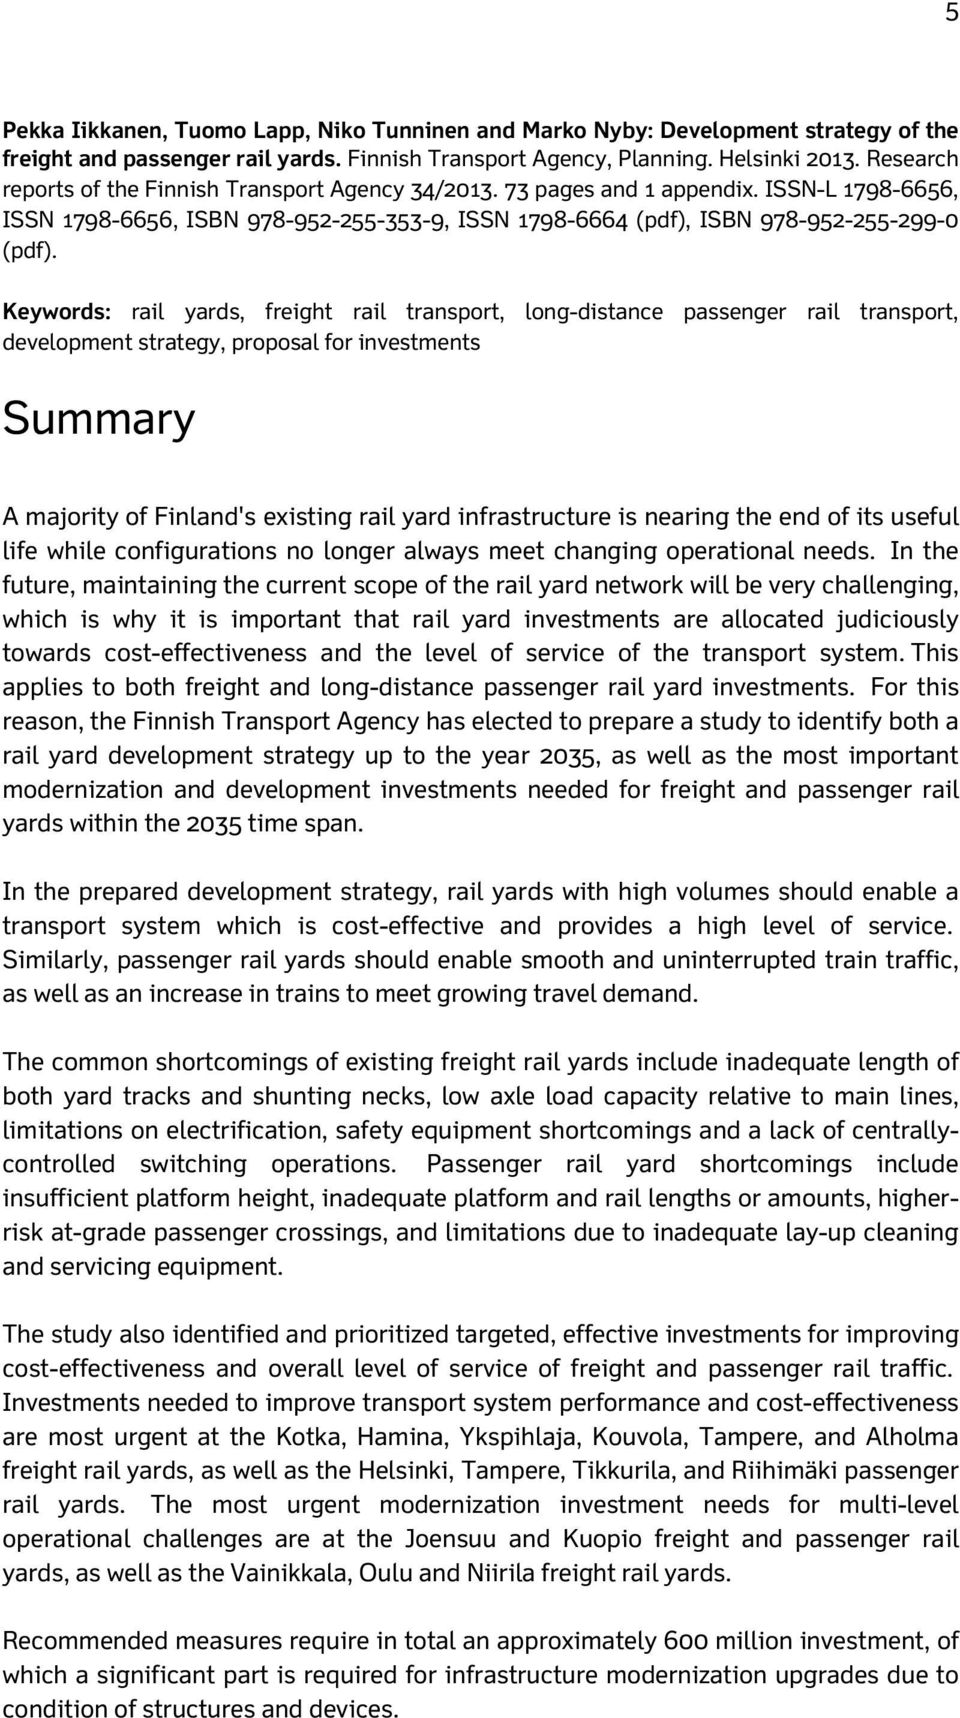 Keywords: rail yards, freight rail transport, long-distance passenger rail transport, development strategy, proposal for investments Summary A majority of Finland's existing rail yard infrastructure